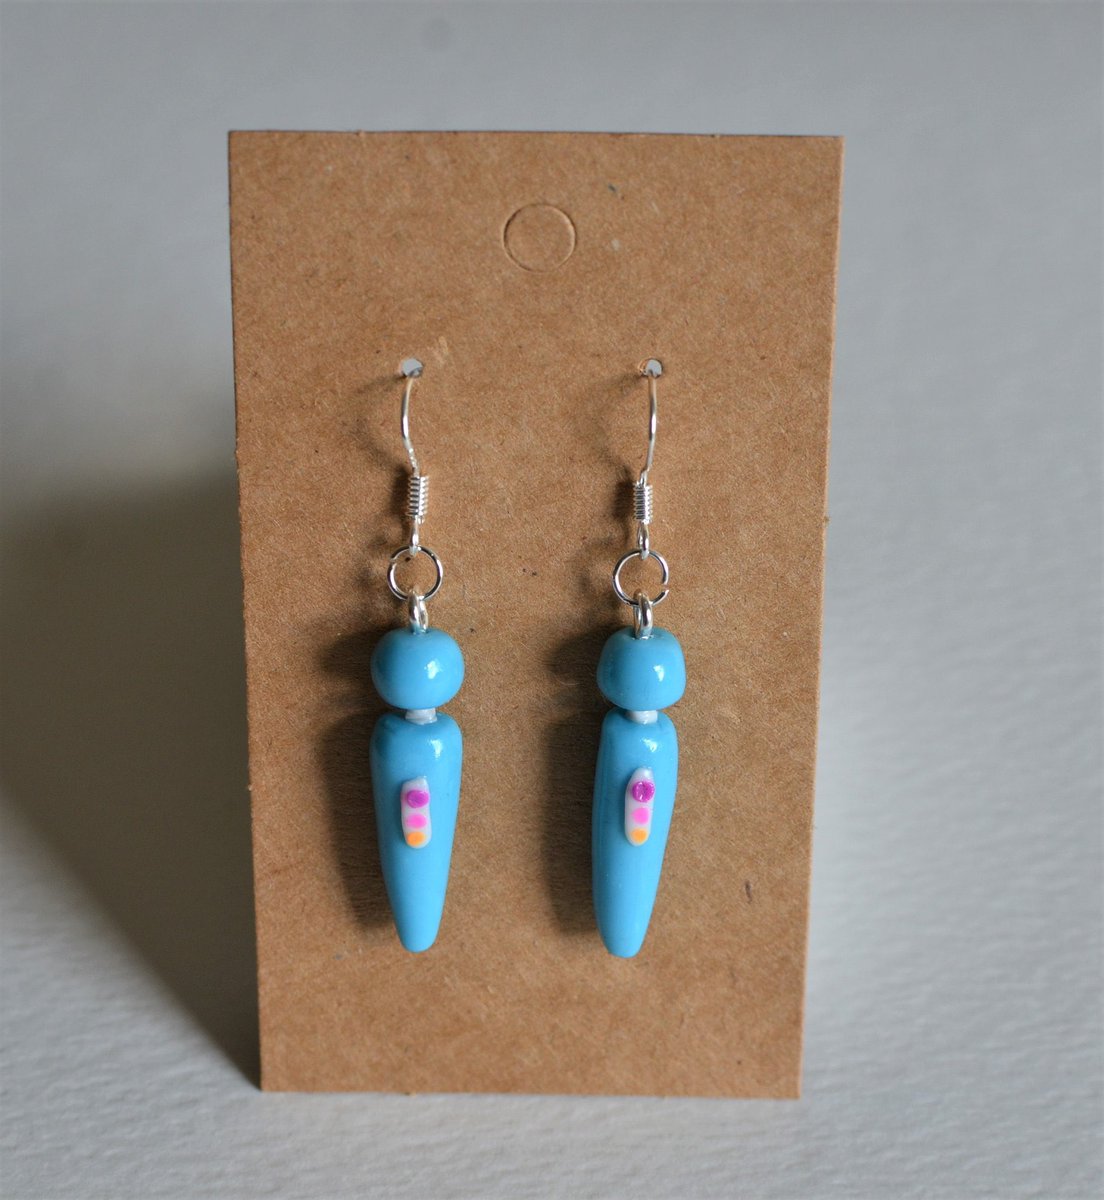 Tea & Whiskers goal is to brighten everyone’s day & with the artist’s range of cute colourful earrings you can see she brings happiness to earlobes everywhere! Visit Bríd’s Etsy shop:  https://etsy.com/ie/shop/TeaAndWhiskers